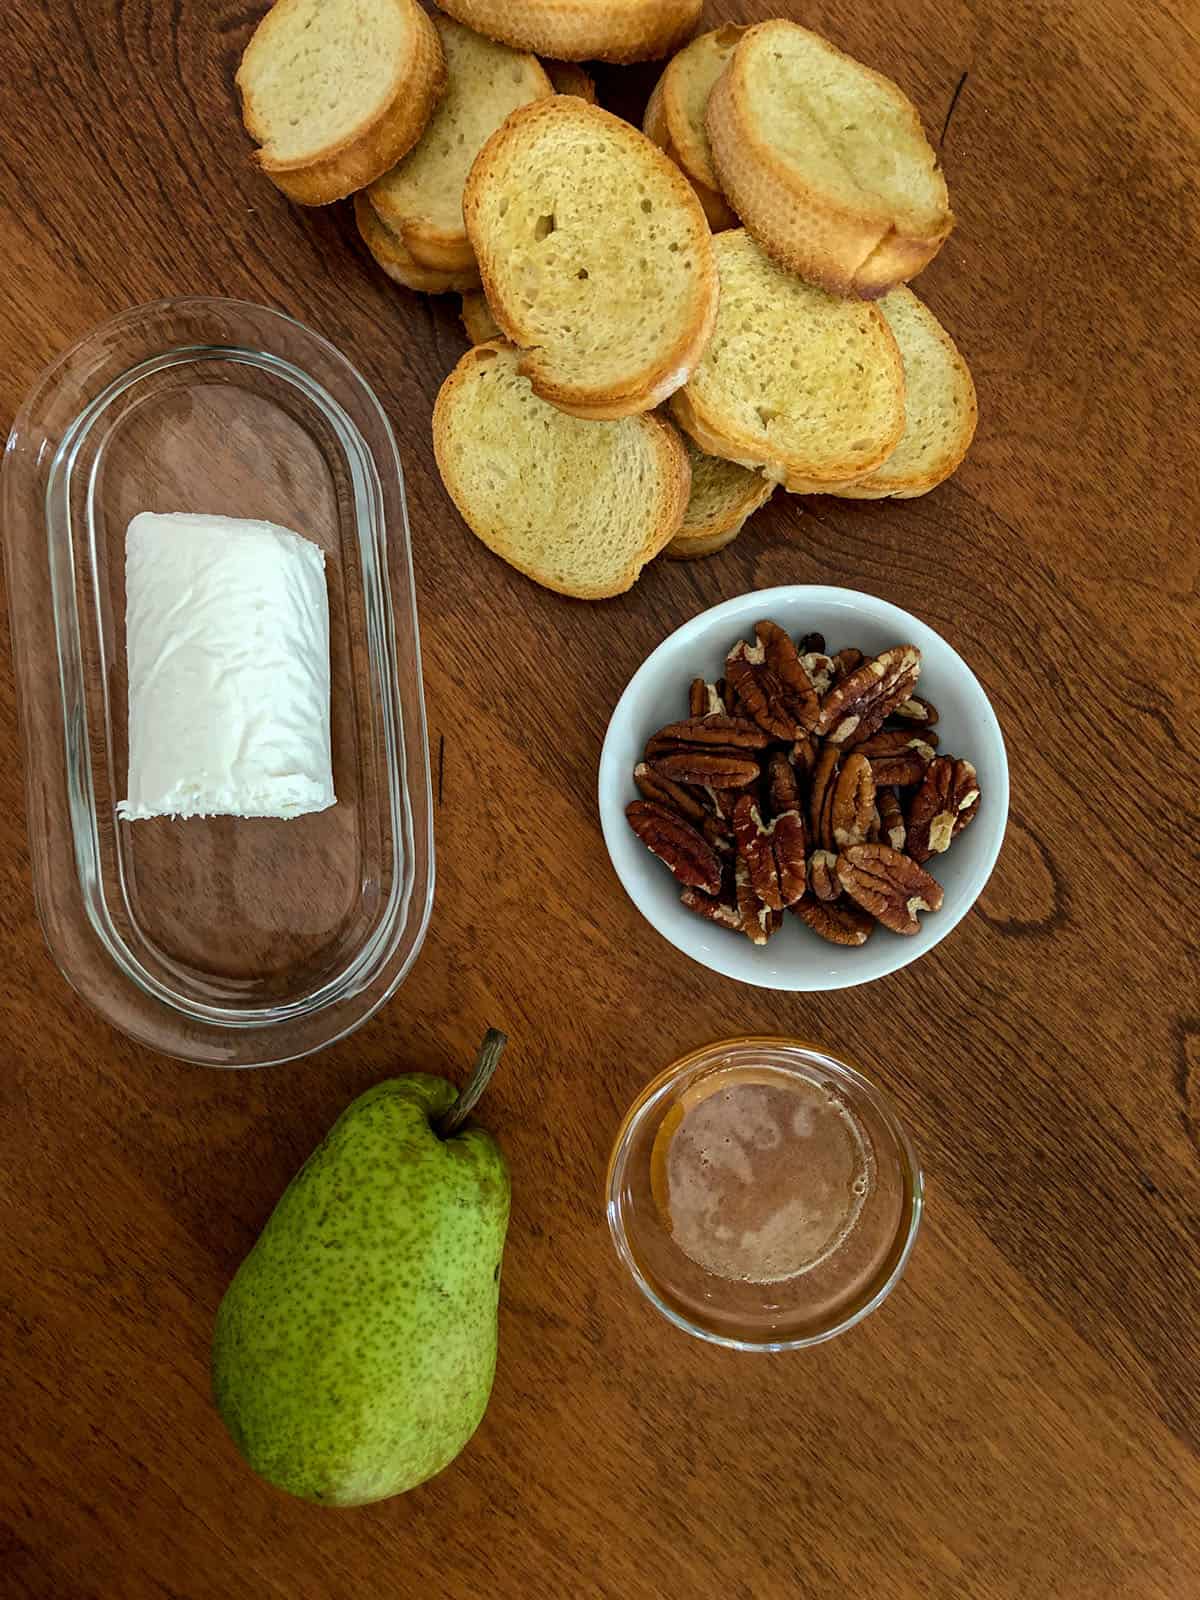 Crostini, pecans, honey, a pear, and log of goat cheese.